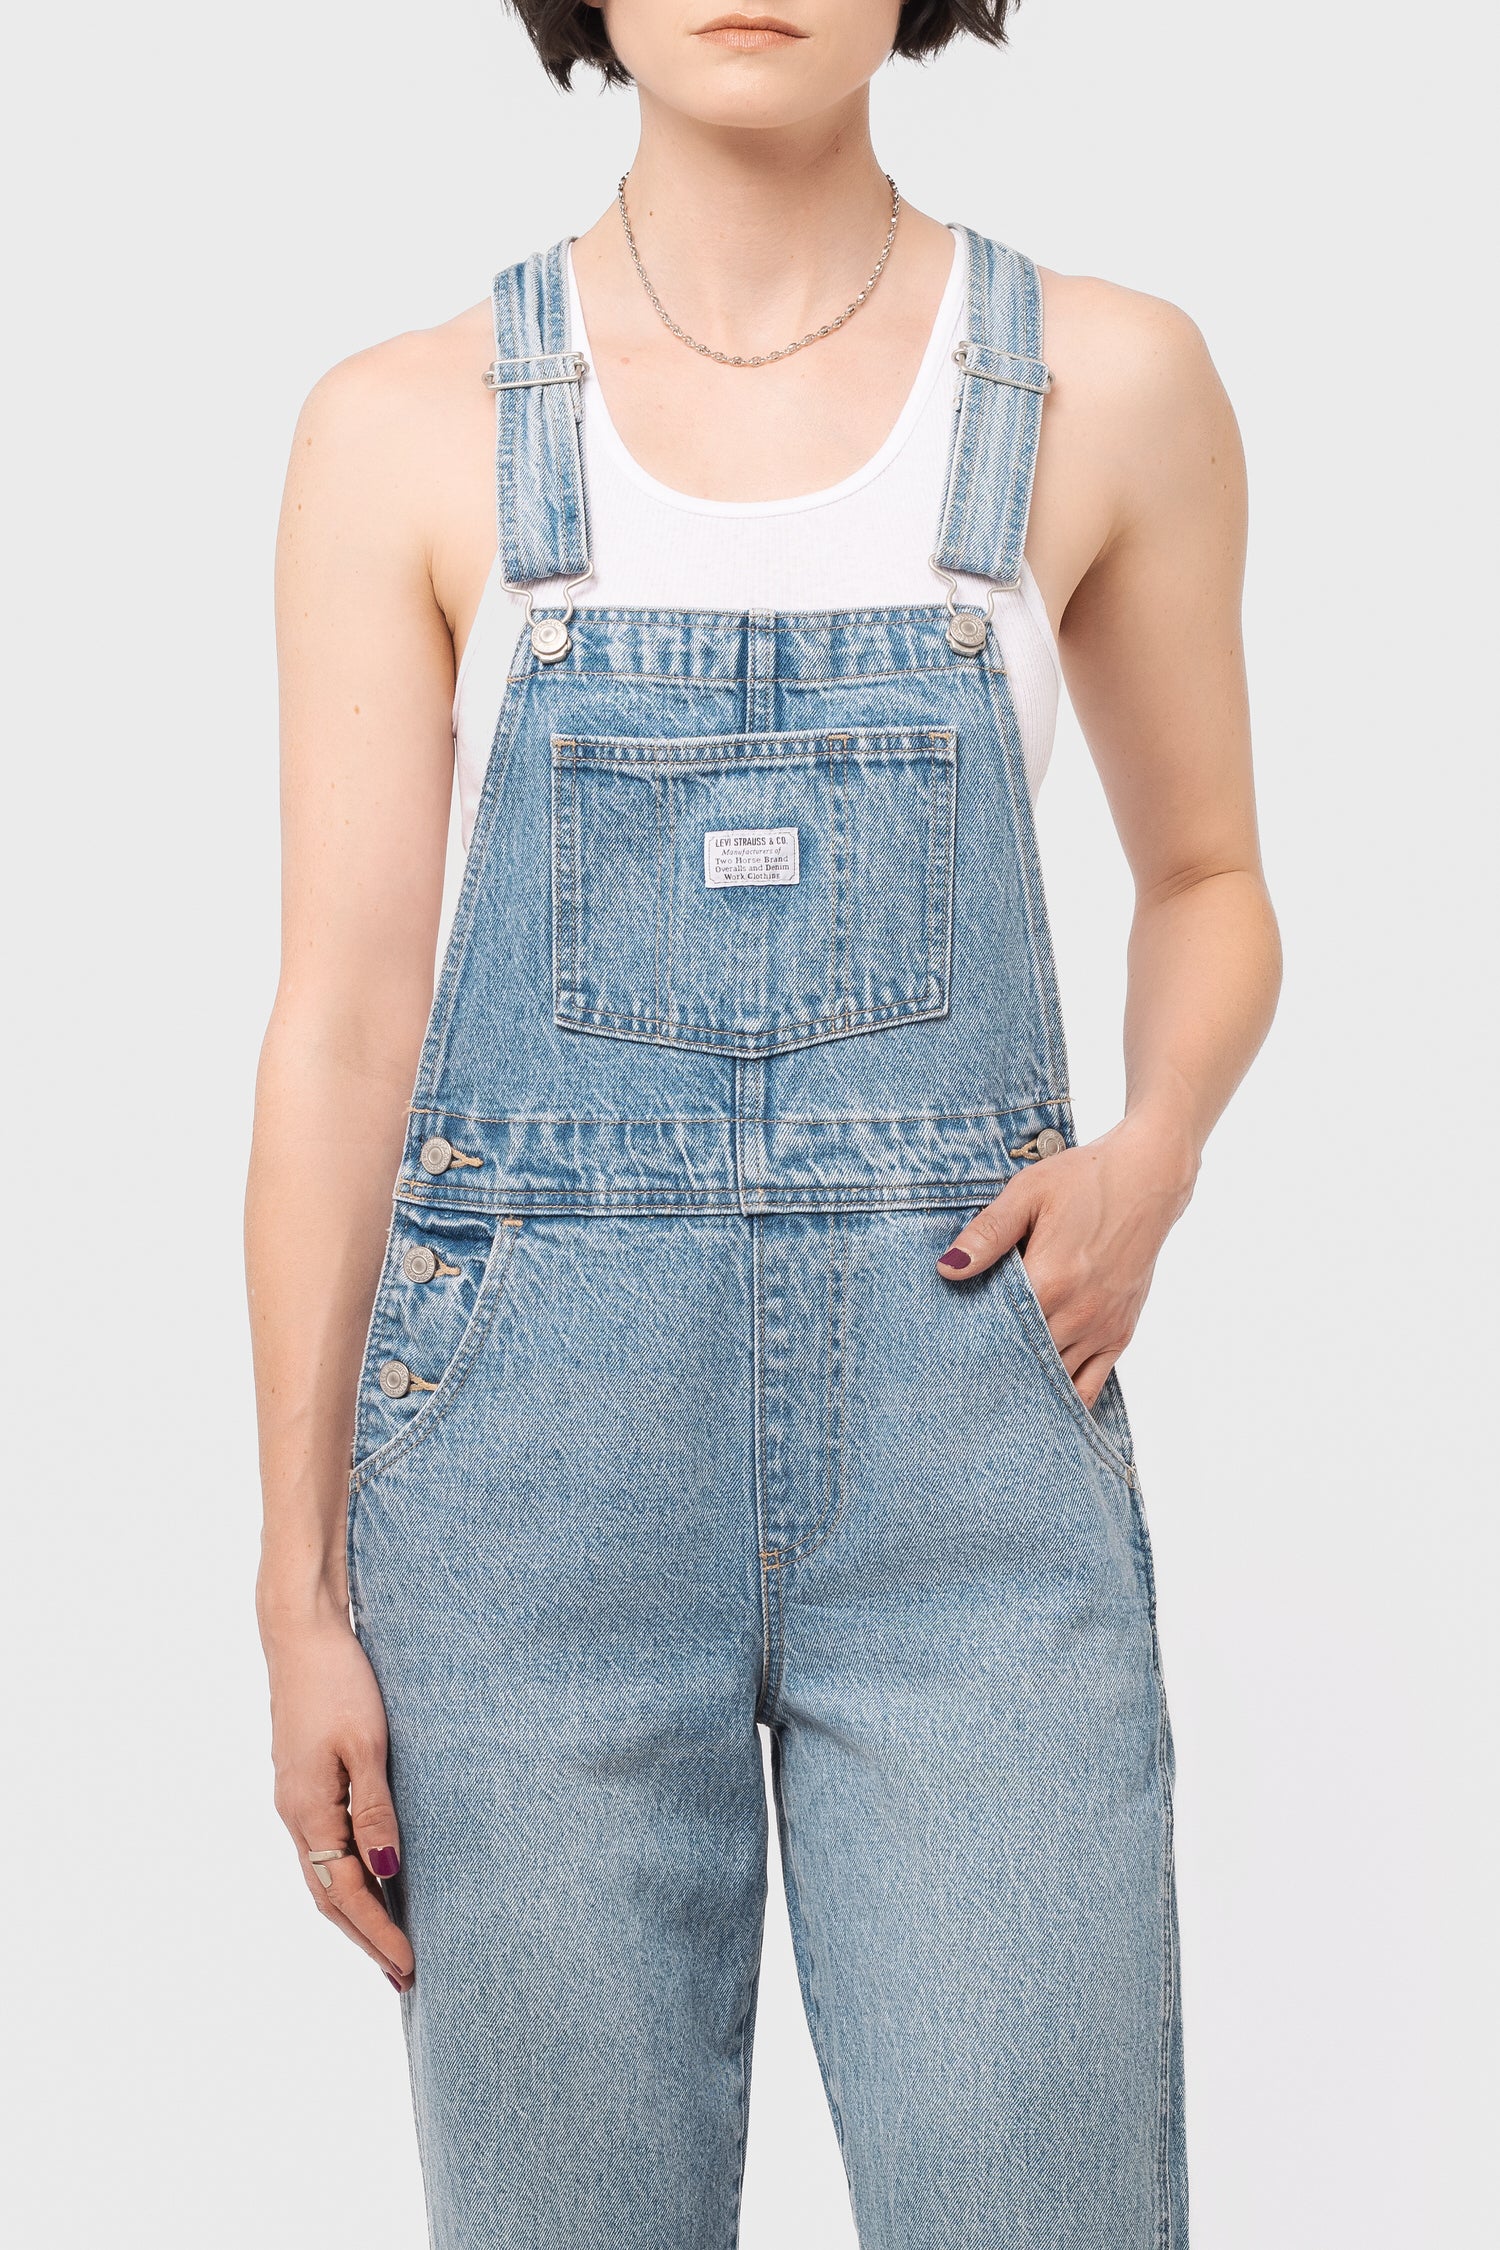 Women's Levi's Vintage Overall in What a Delight